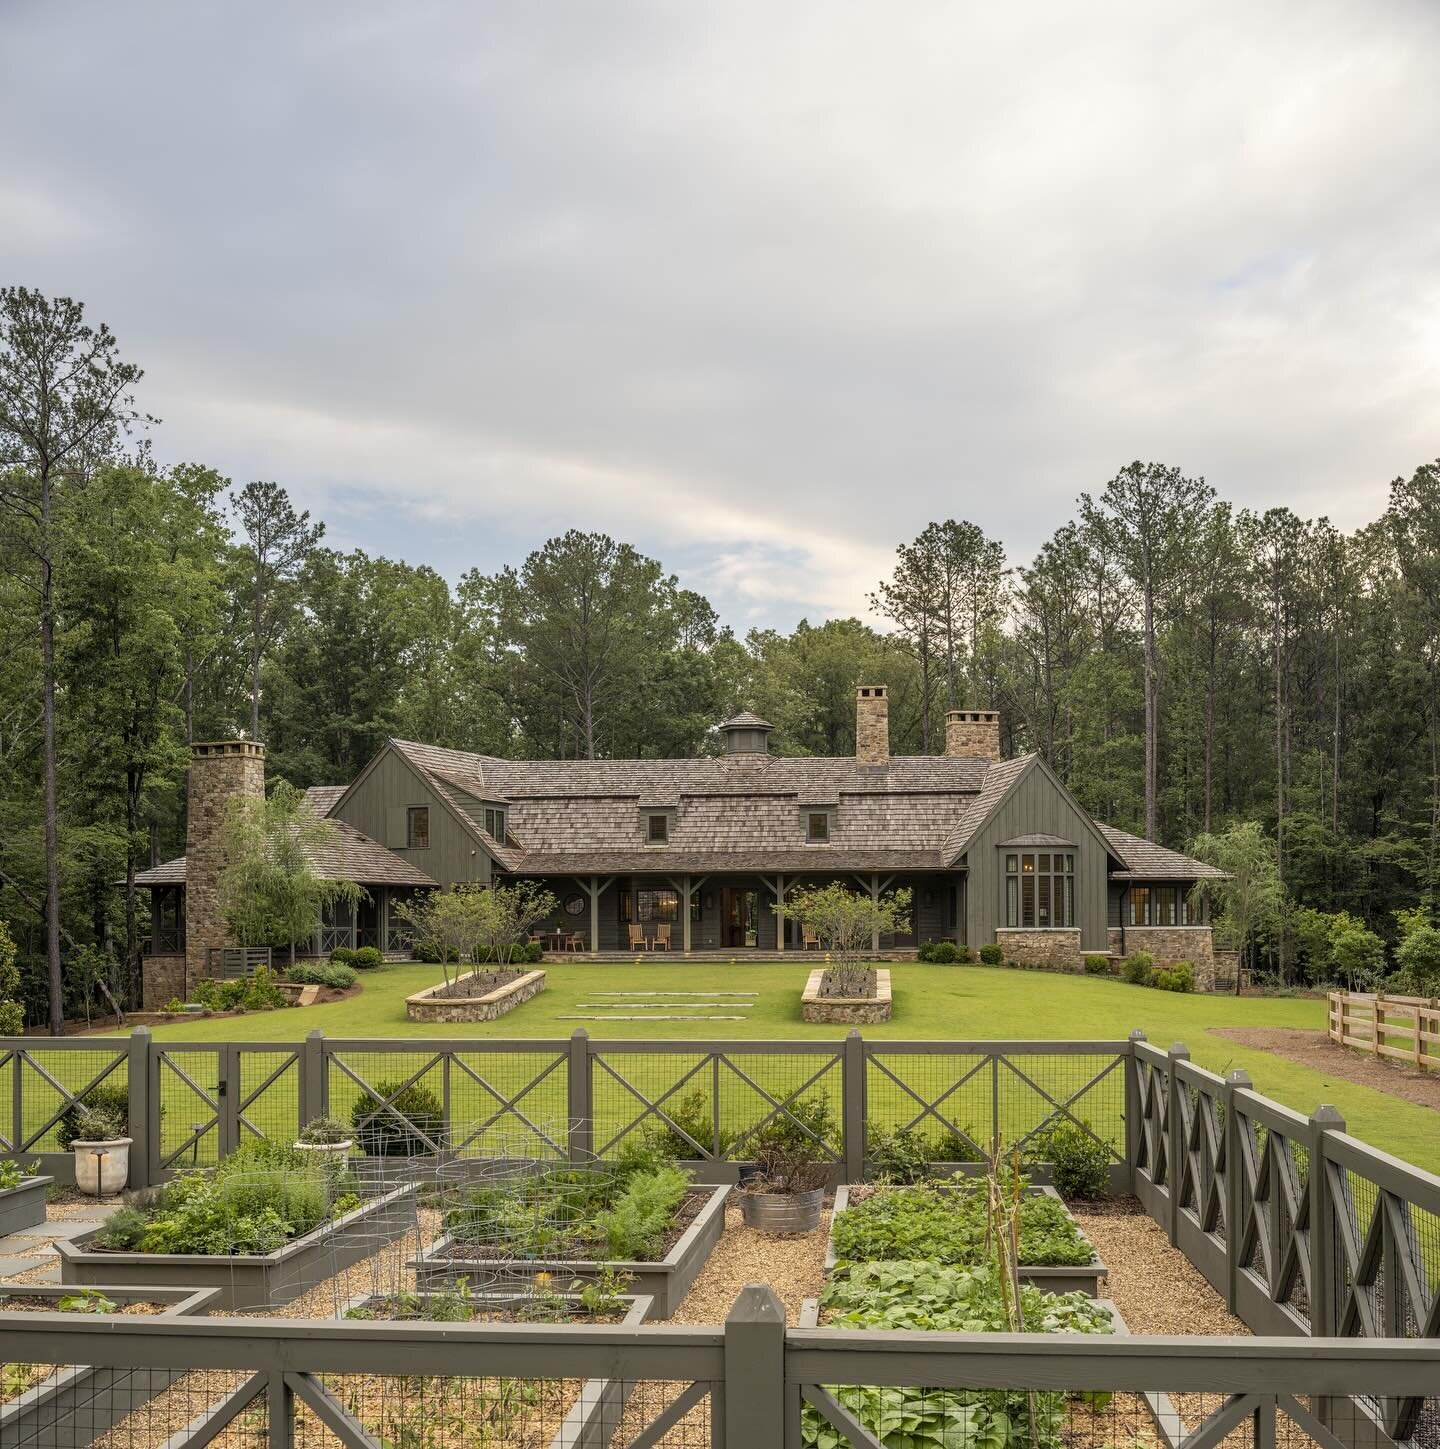 An over-the-garden view of our Shelby County farm project, through the lens of @landinophoto  Local stone, cedar roof and cypress siding feel right at home in this setting of woods and fields. 
.
.
Architect: @carlislemoorearchitects 
Interiors: @lyn